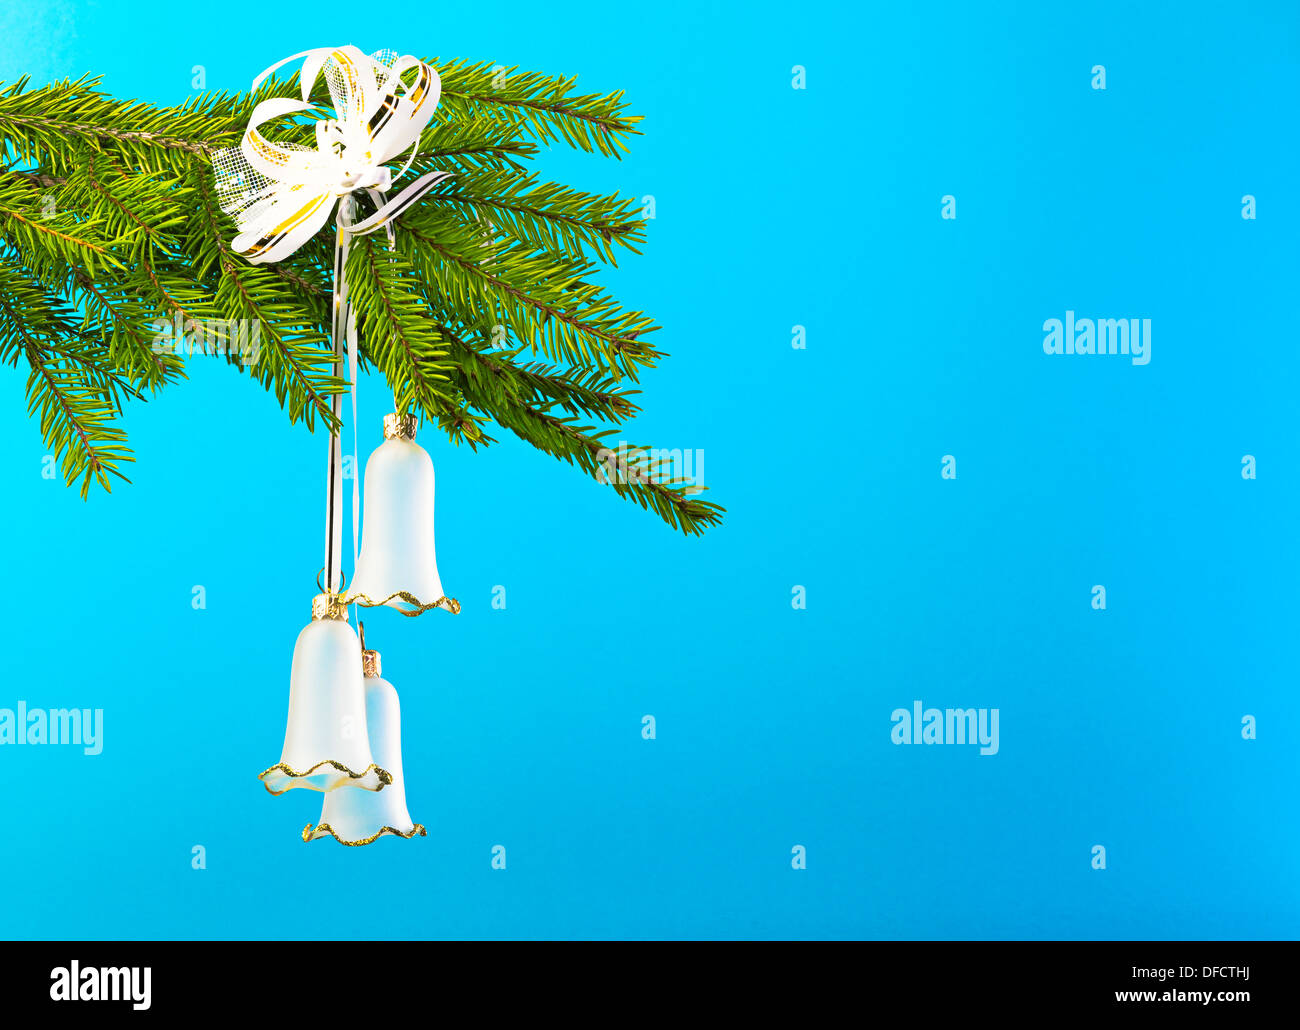 Christmas tree decorations against blue background Stock Photo